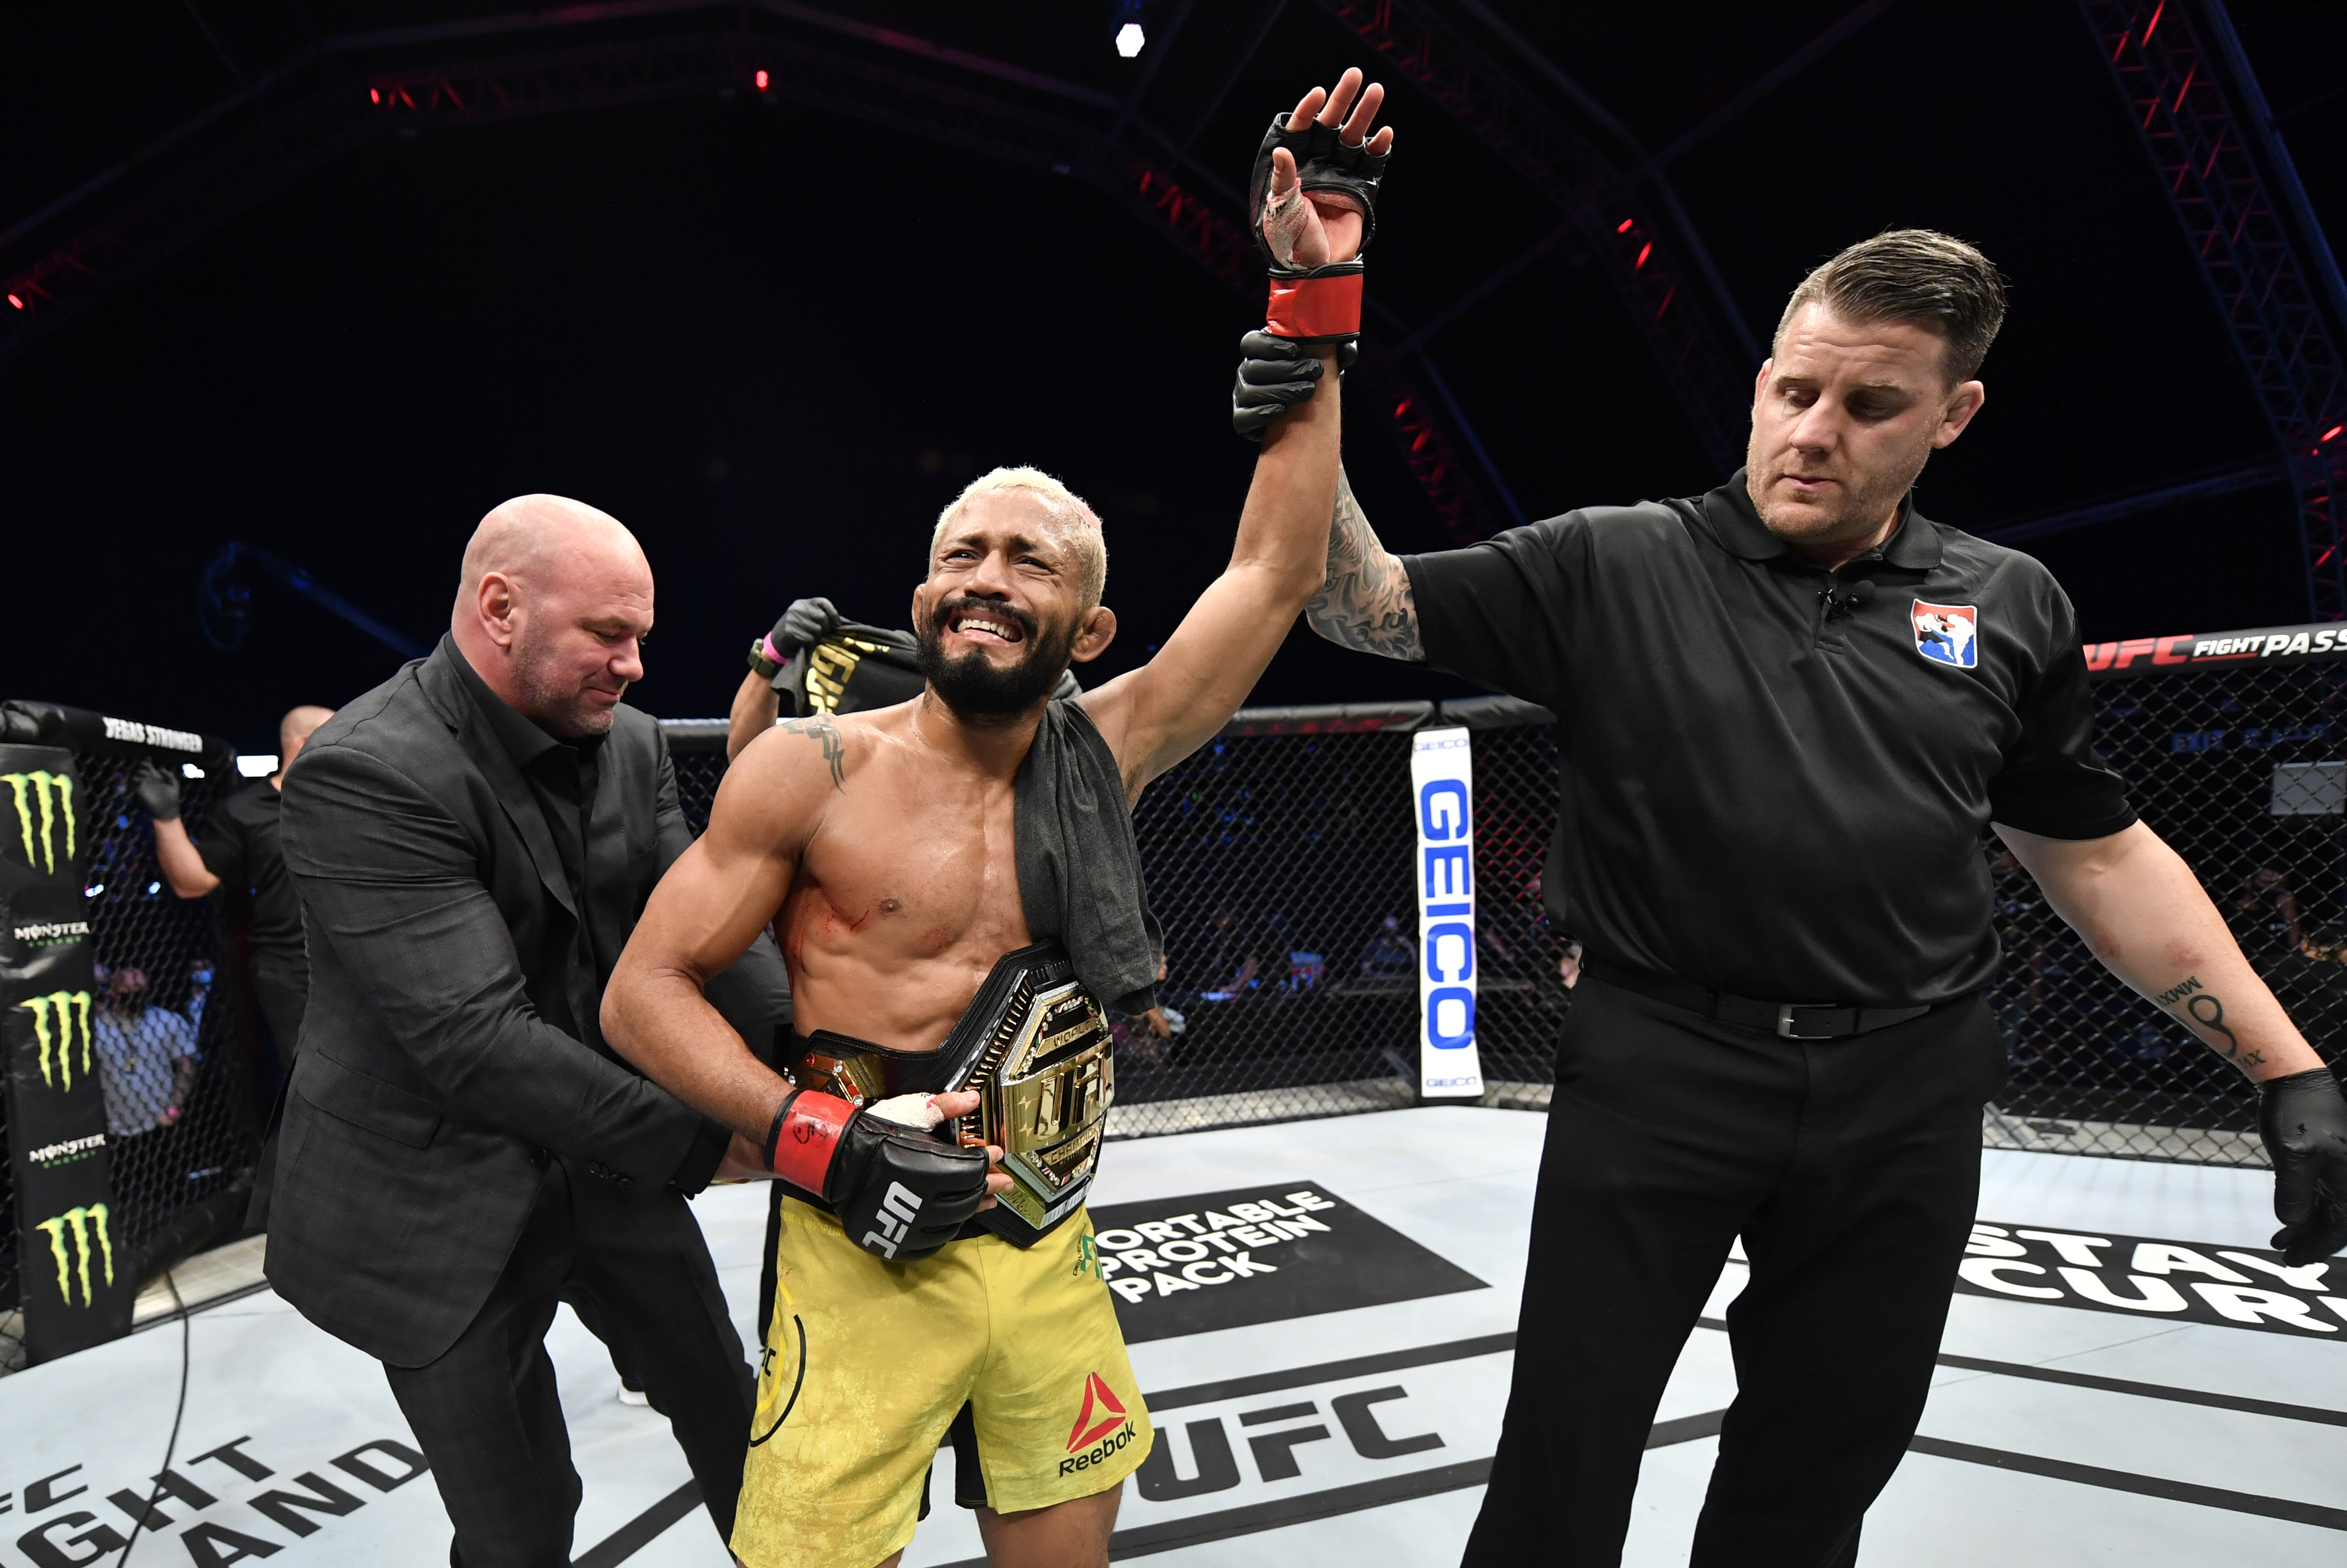 In this handout image provided by UFC, Deiveson Figueiredo of Brazil celebrates after defeating Joseph Benavidez in their UFC flyweight championship bout during the UFC Fight Night event inside Flash Forum on UFC Fight Island on July 19, 2020 in Yas Island, Abu Dhabi, United Arab Emirates.